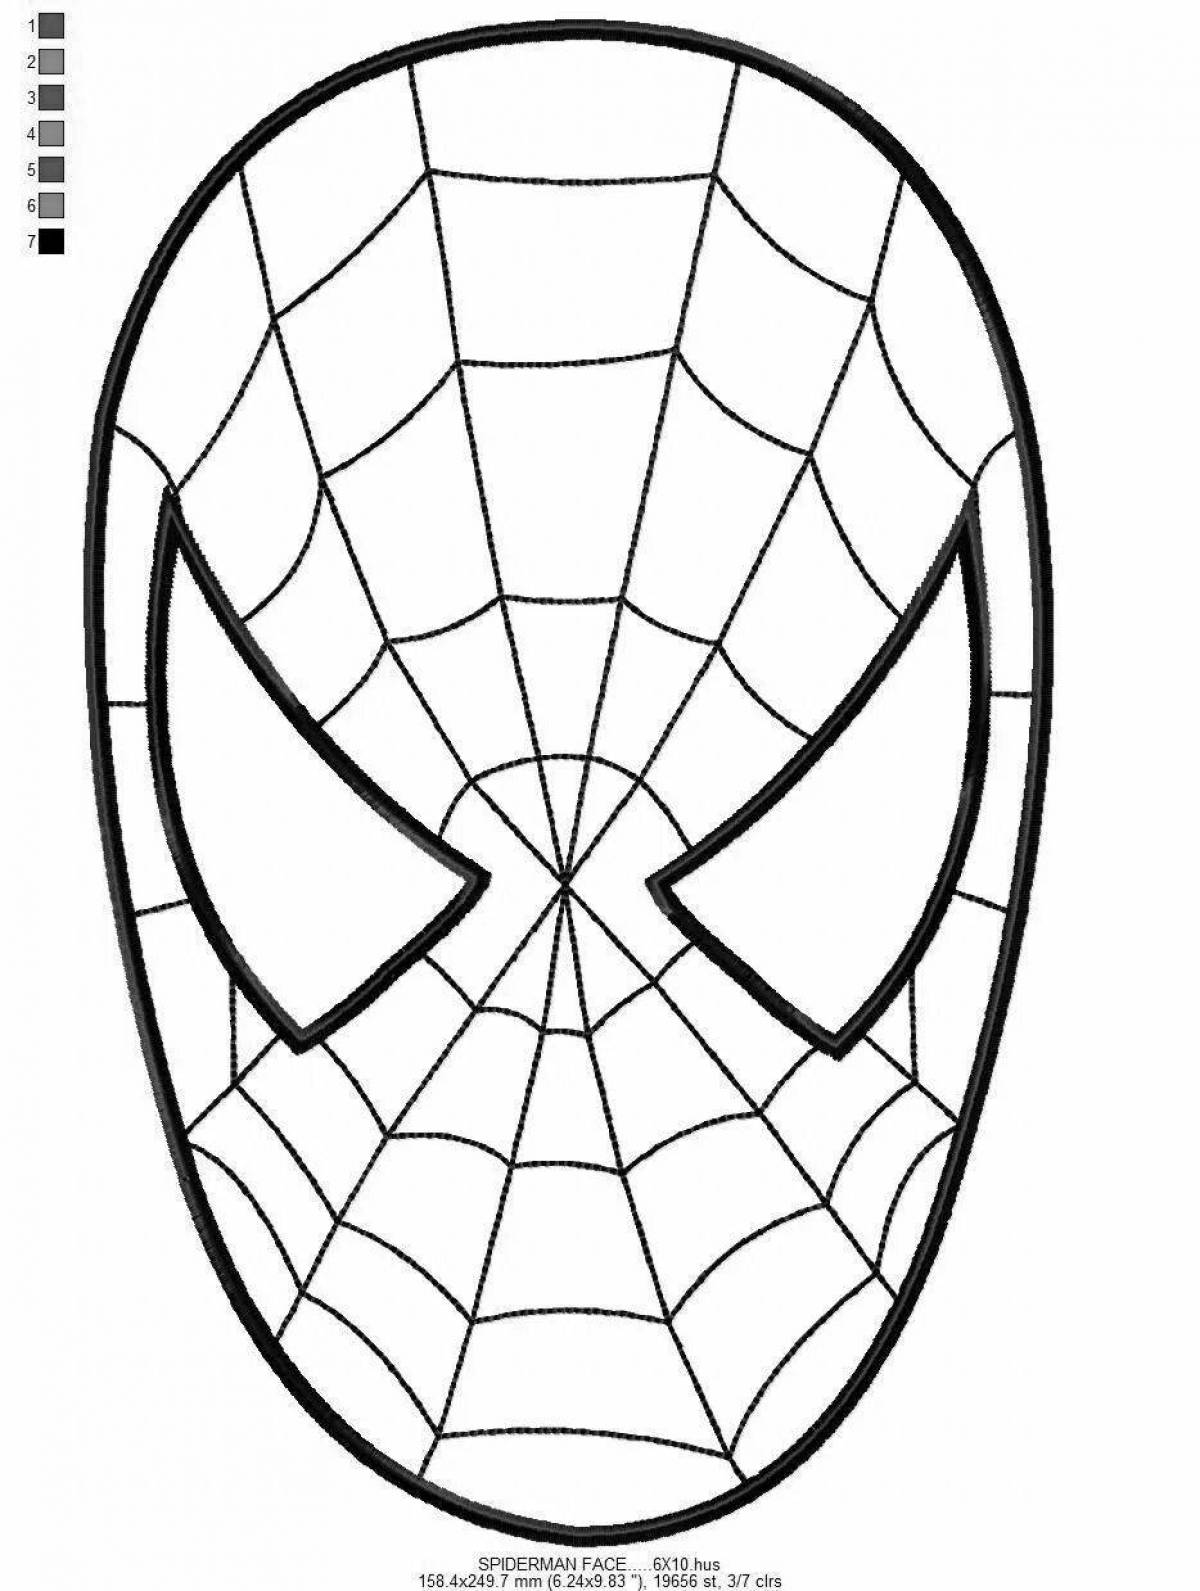 Spider-man shining mask coloring page